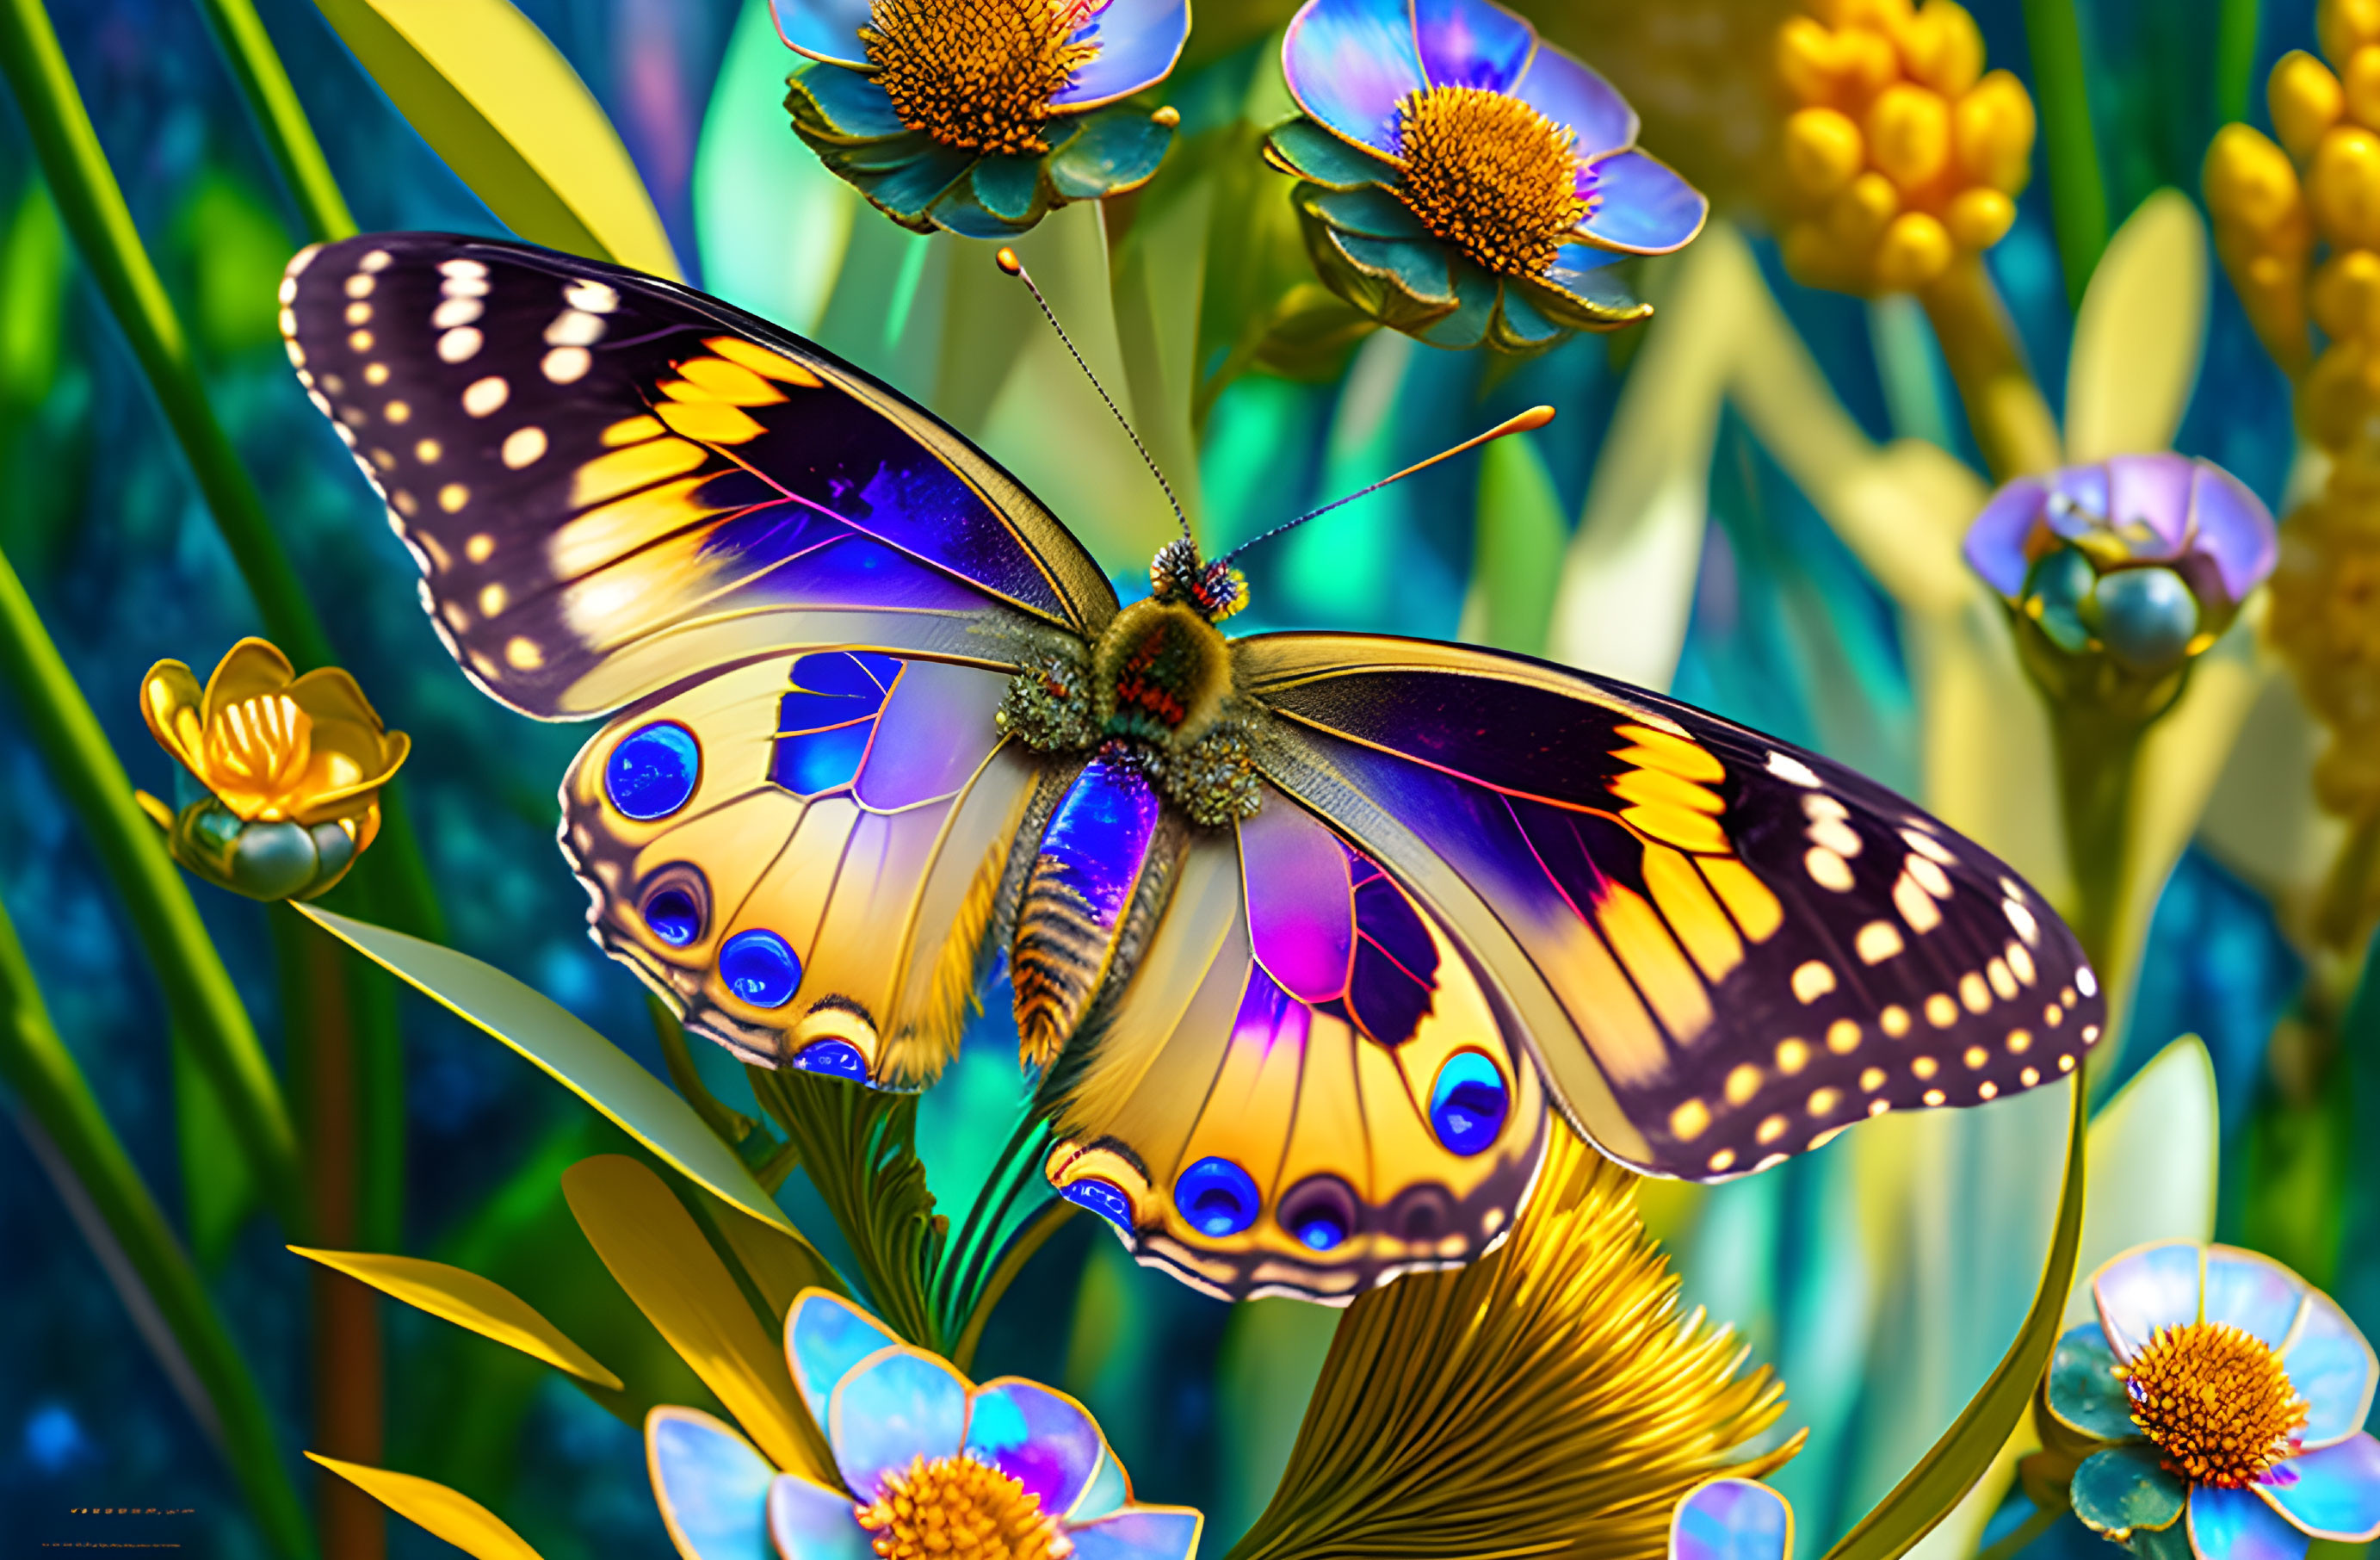 Colorful Butterfly Among Intricate Flowers in Fantasy Garden